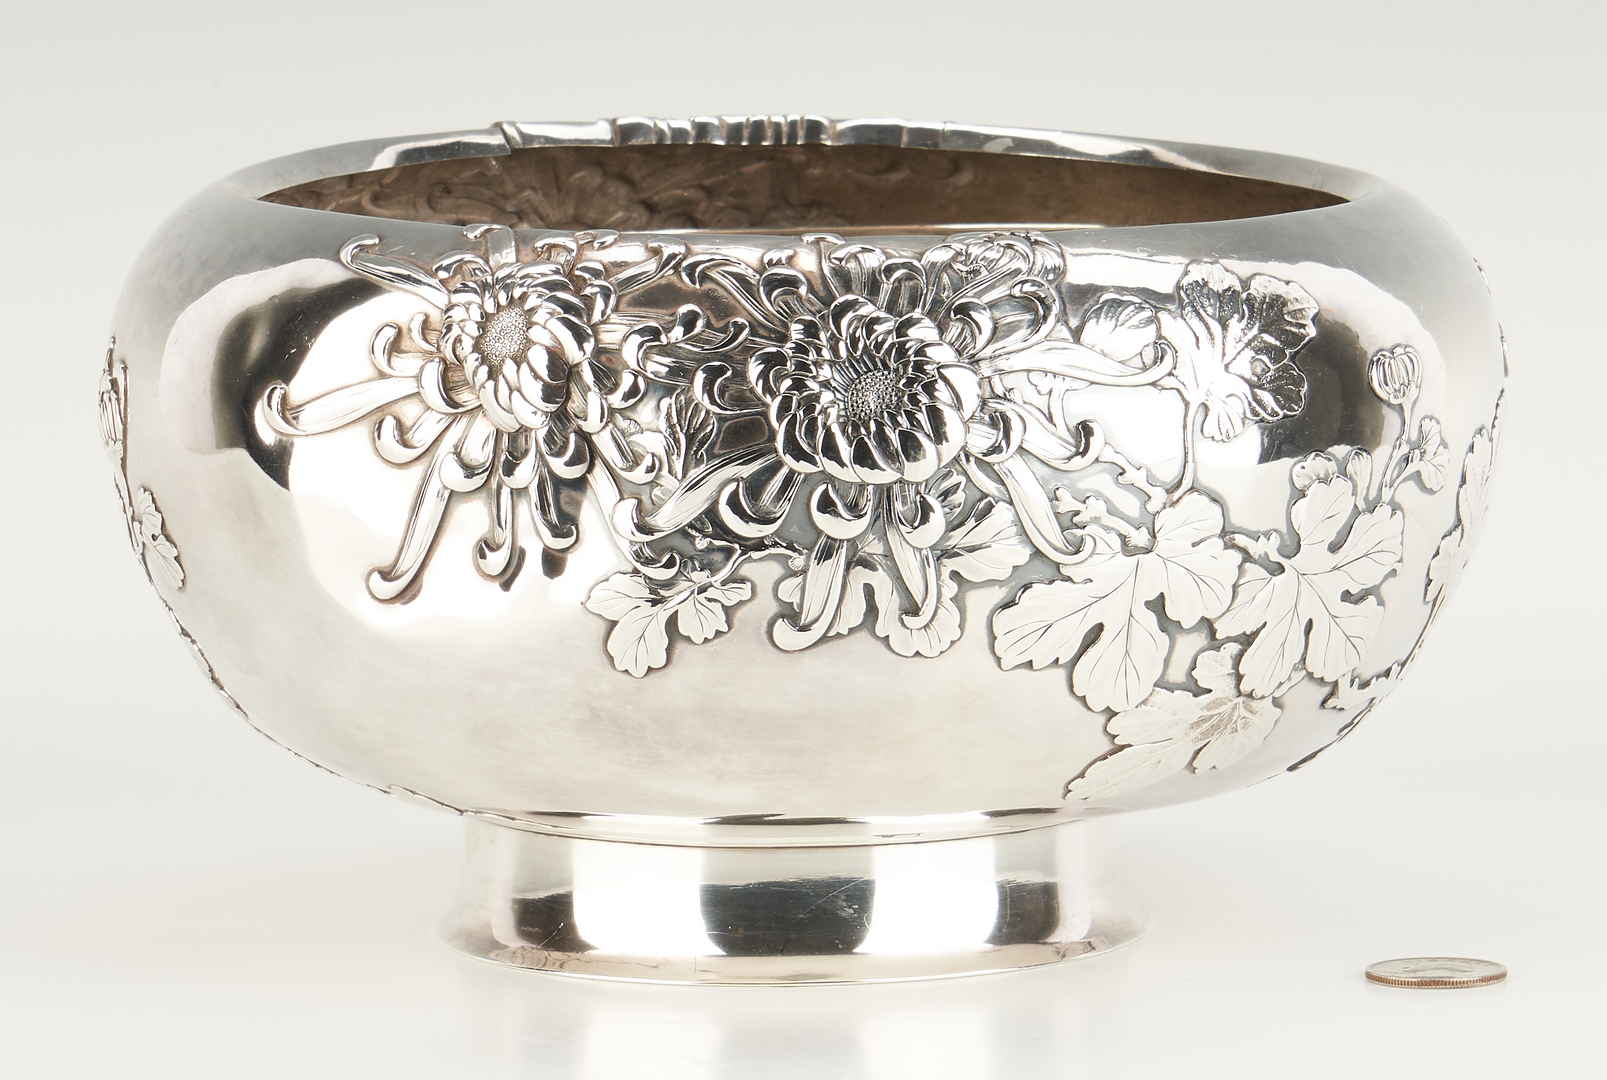 Lot 2: Japanese or Chinese Export Silver Bowl